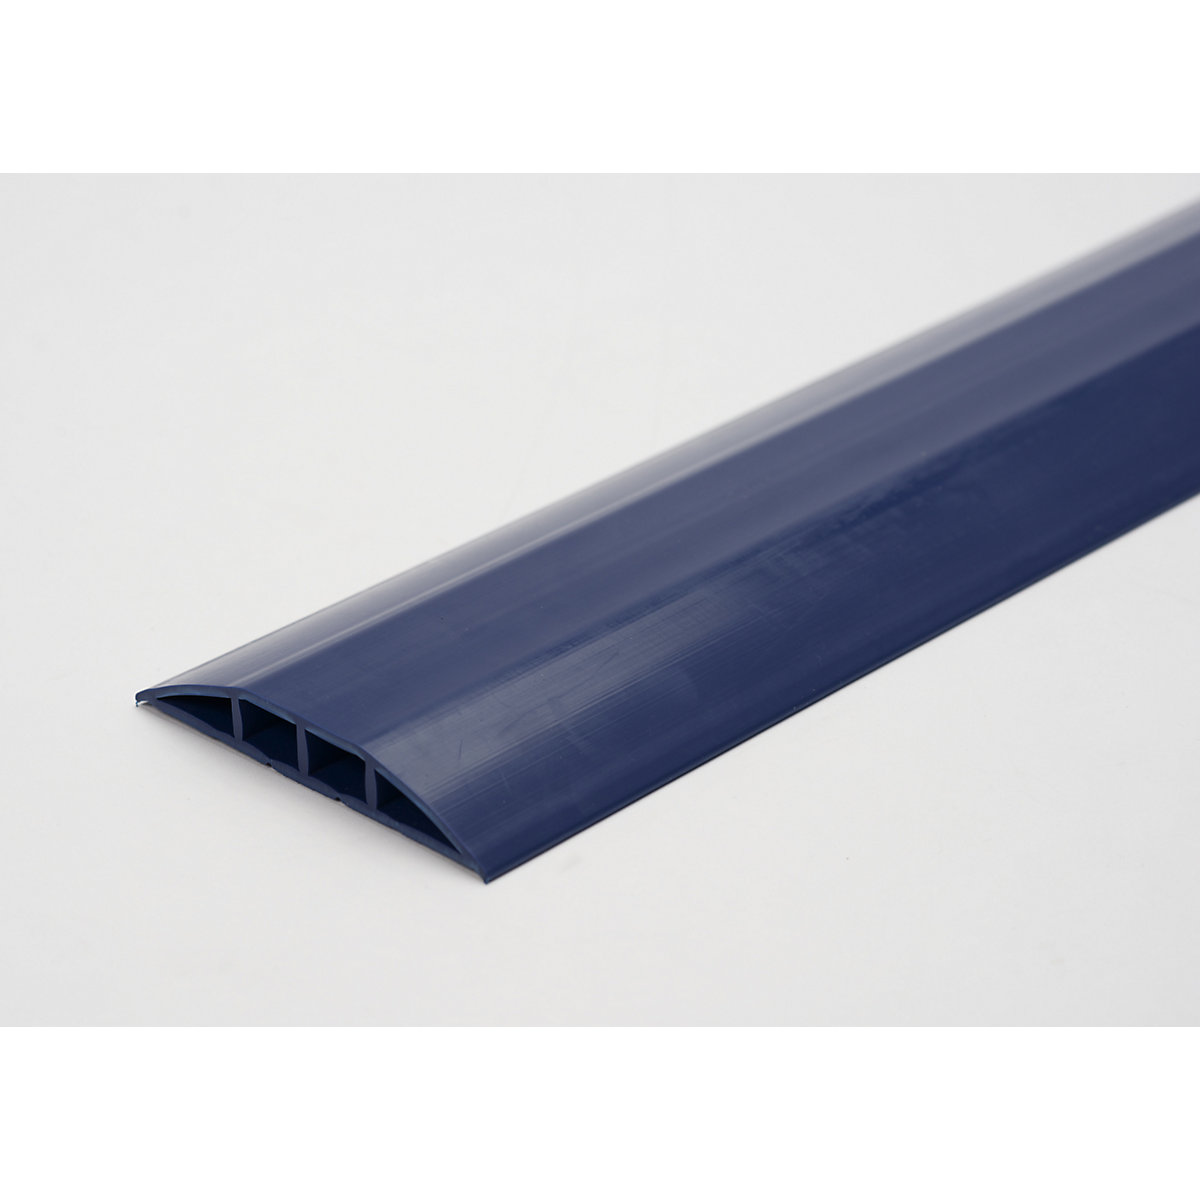 Plastic cable duct, for cables and hoses with Ø up to 10 mm, blue, 2 chambers, length 1.5 m-2